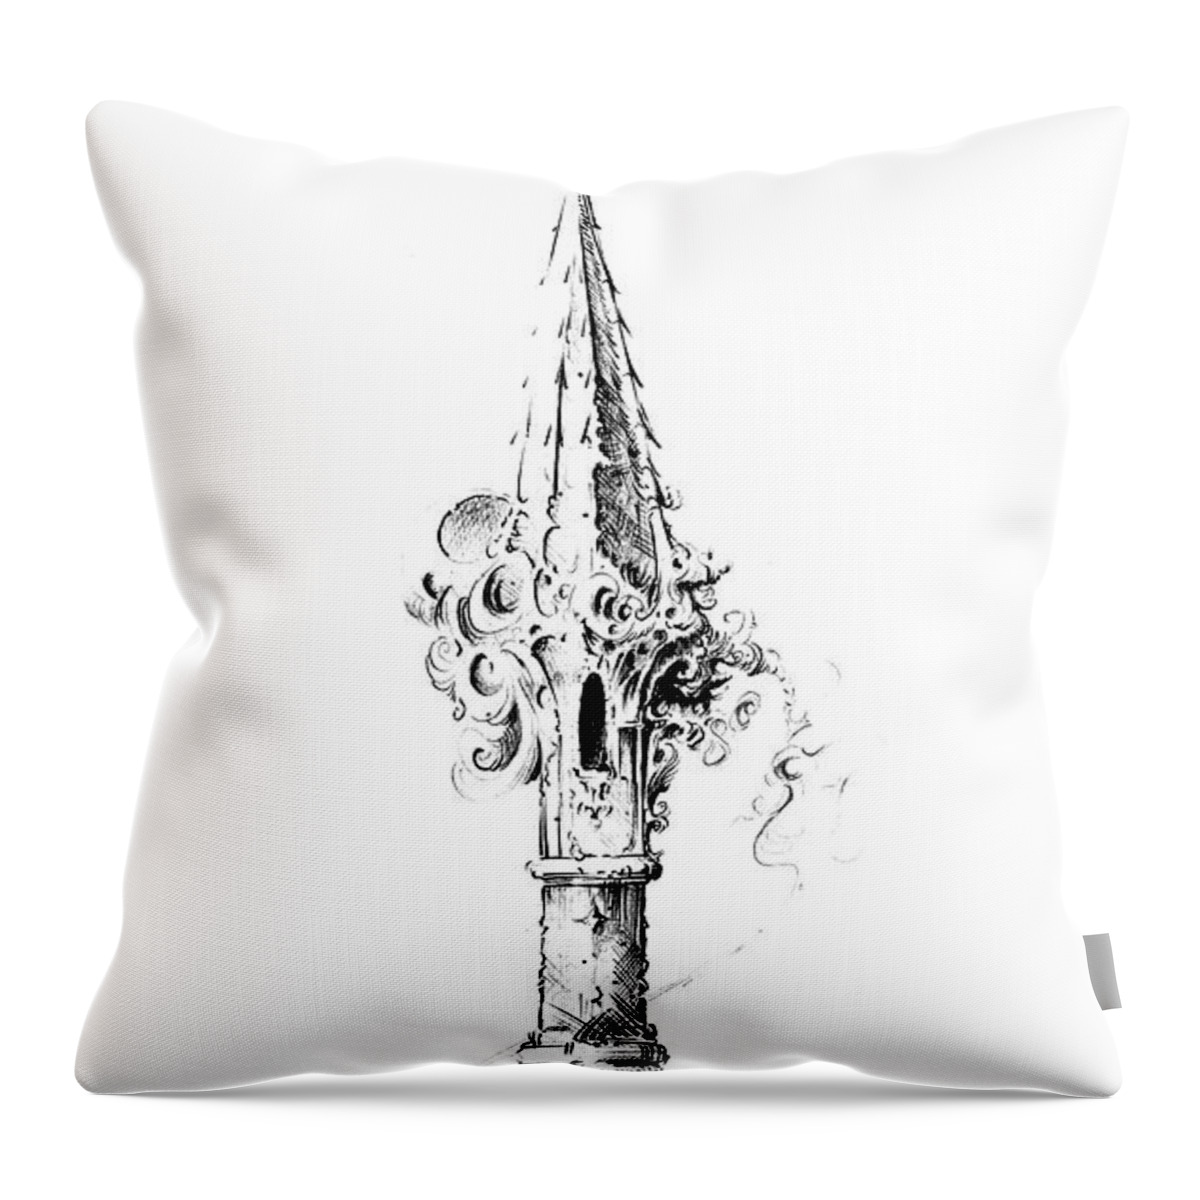 Tower Throw Pillow featuring the drawing Rook by Julio R Lopez Jr